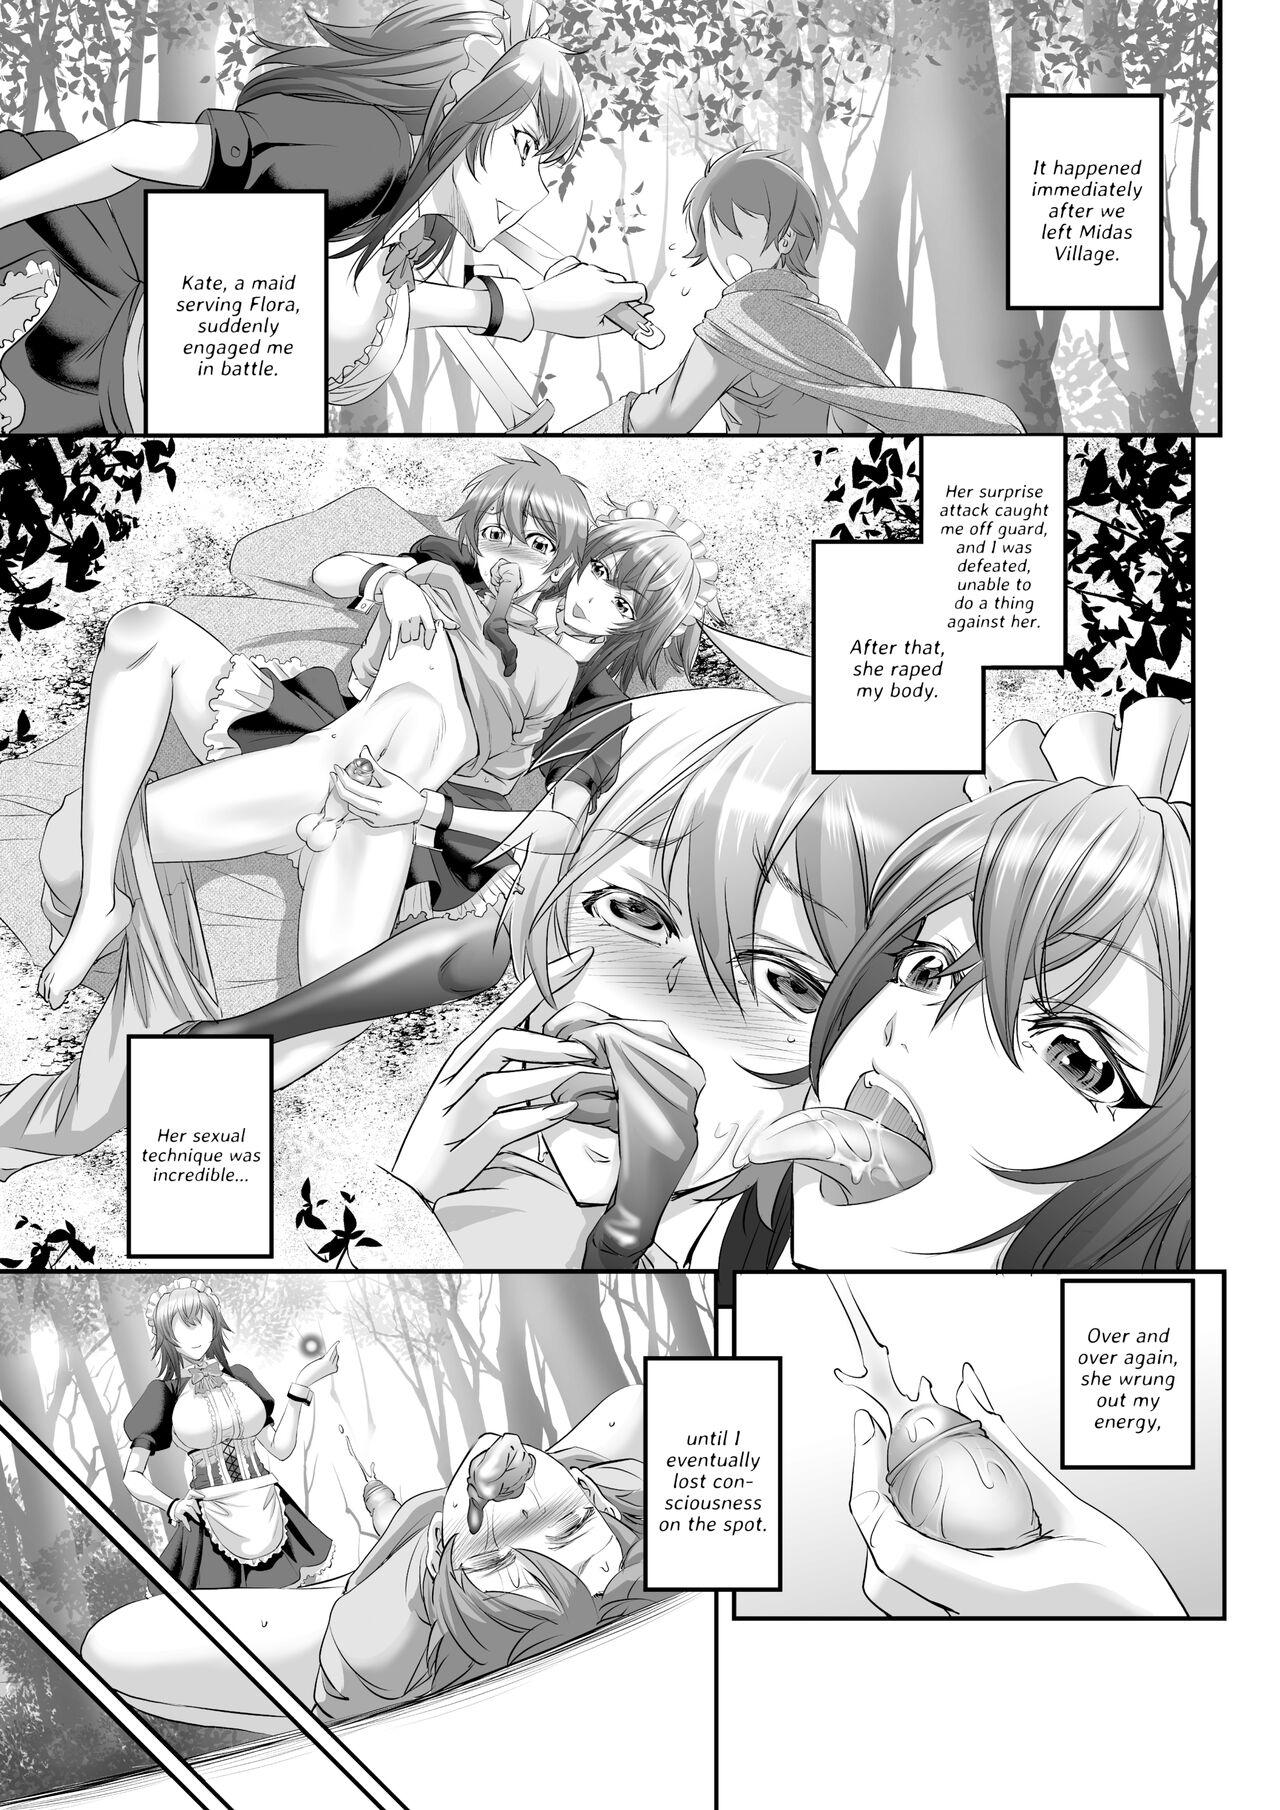 Amateur Asian MonMusu Quest! ~ Luka no Maid Shugyou | Monster Girl Quest! Luka’s Maid Training - Monster girl quest White - Page 3